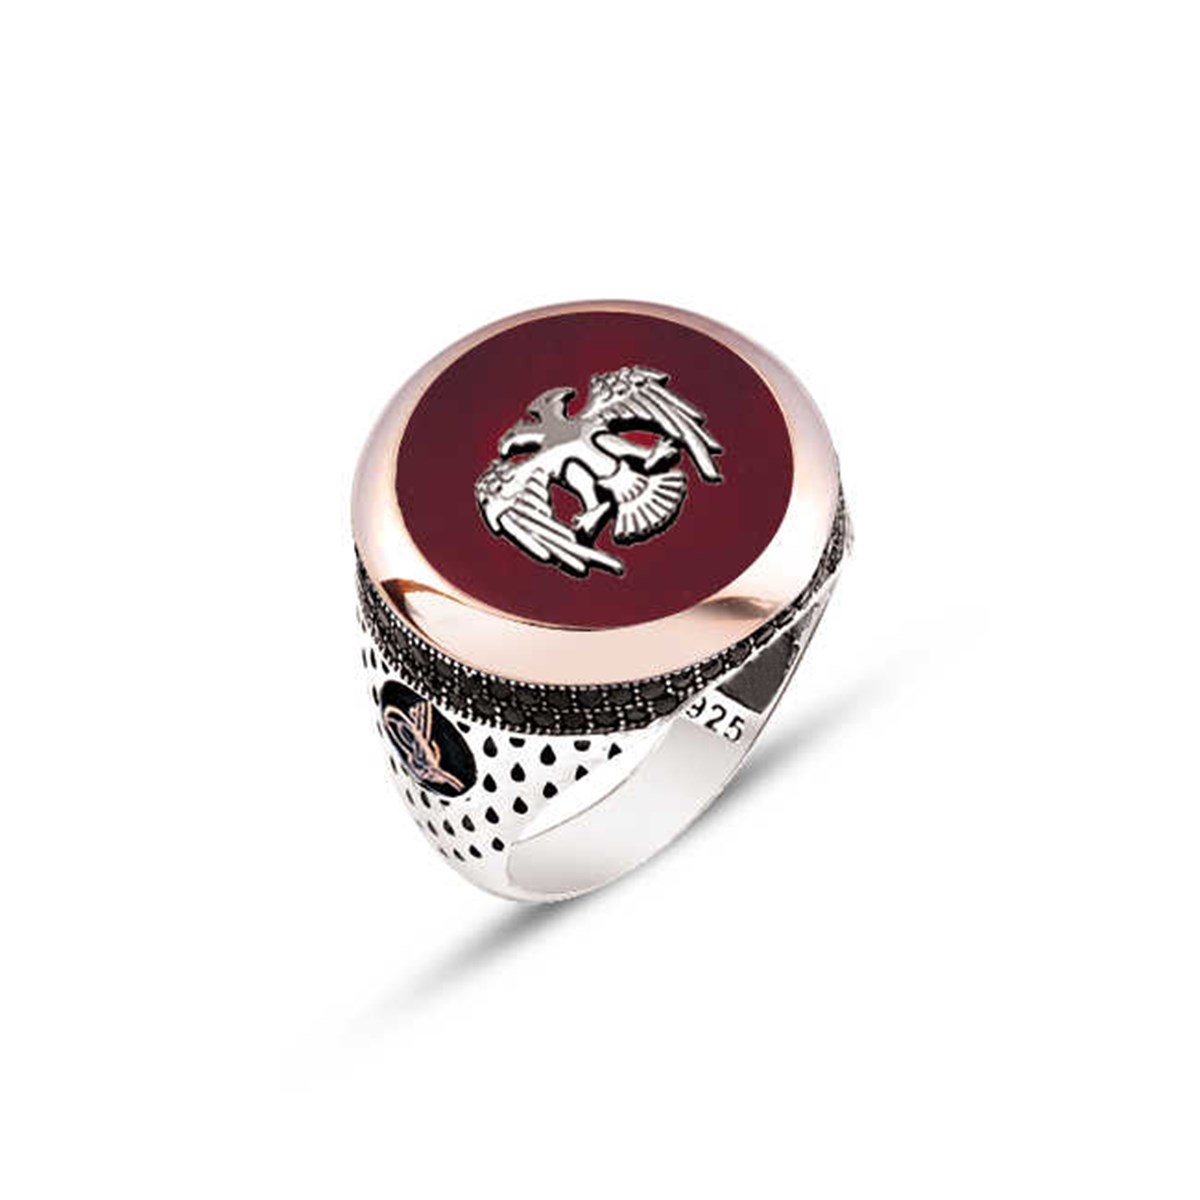 Silver Agate Stone and Seljuk Eagle Embroidered Men's Ring